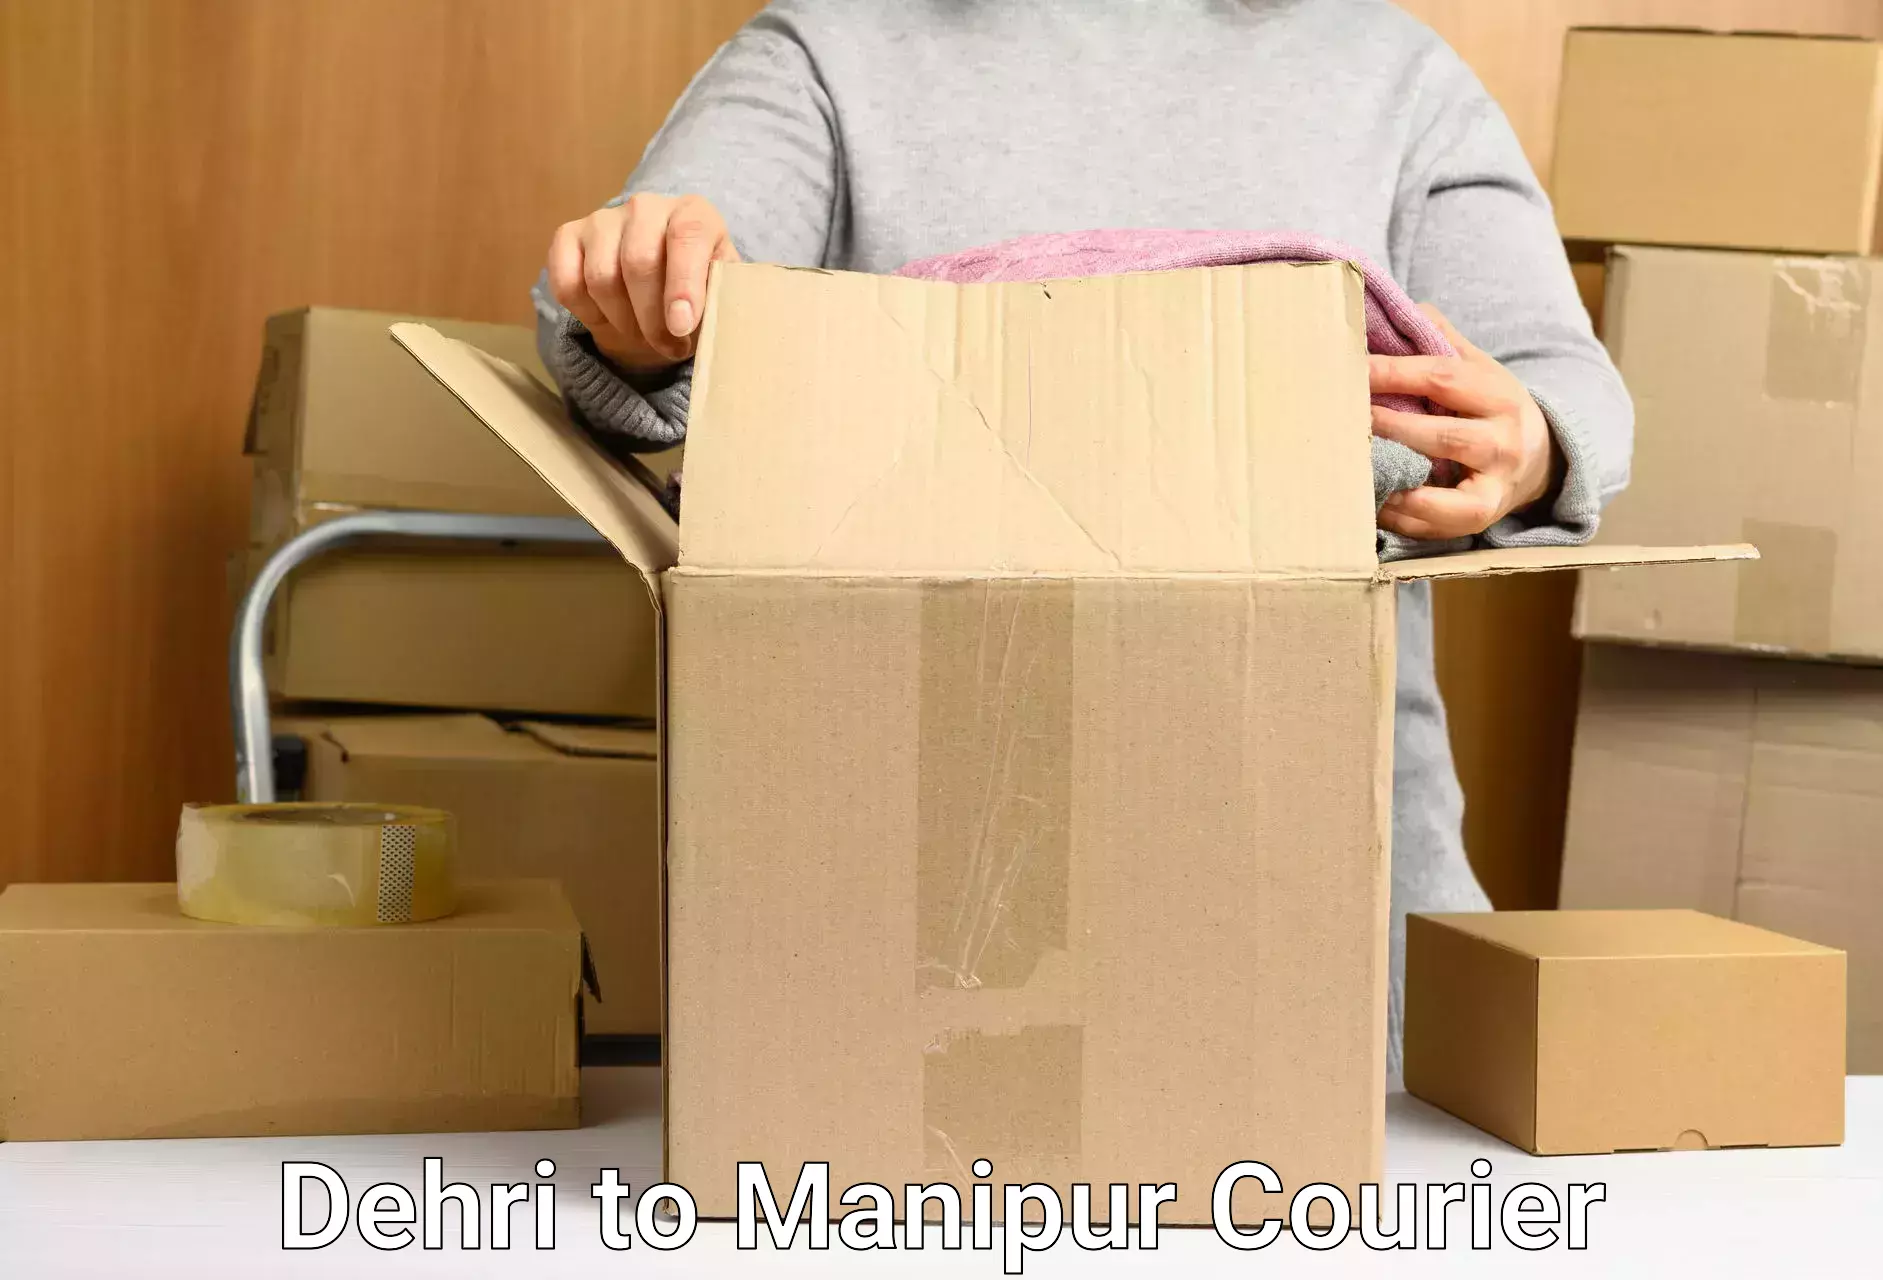 Local delivery service Dehri to Manipur